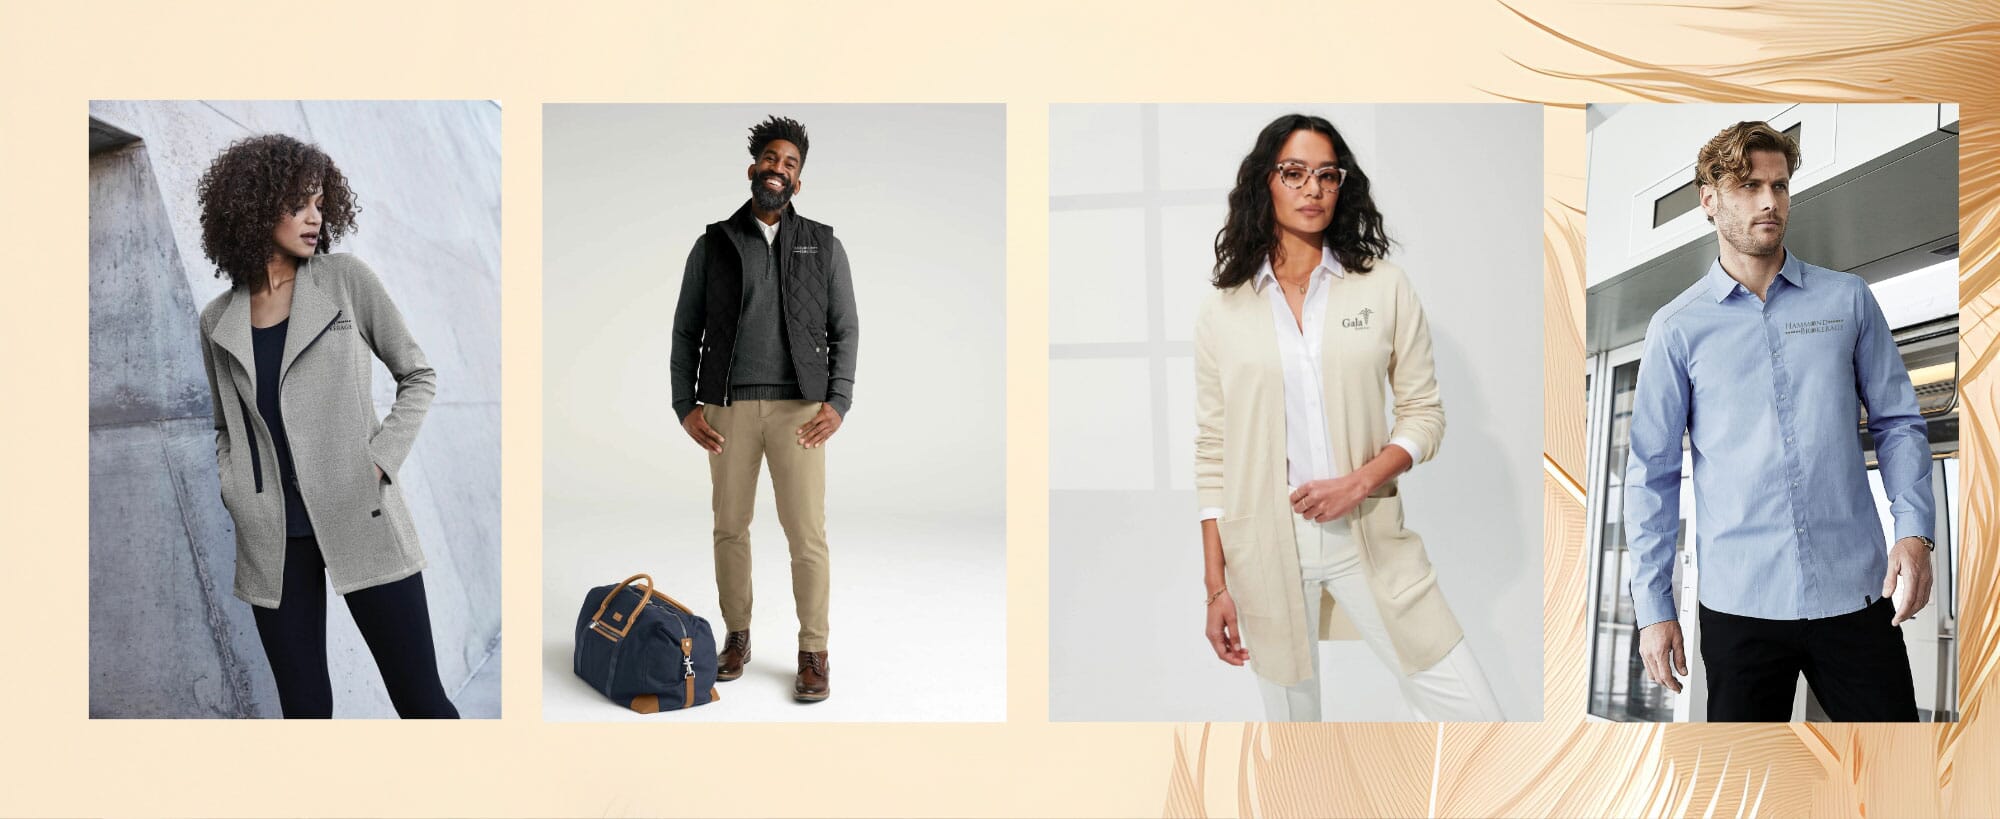 CElevate Your Brand with the Latest Trend in Corporate Apparel – Quiet Luxury